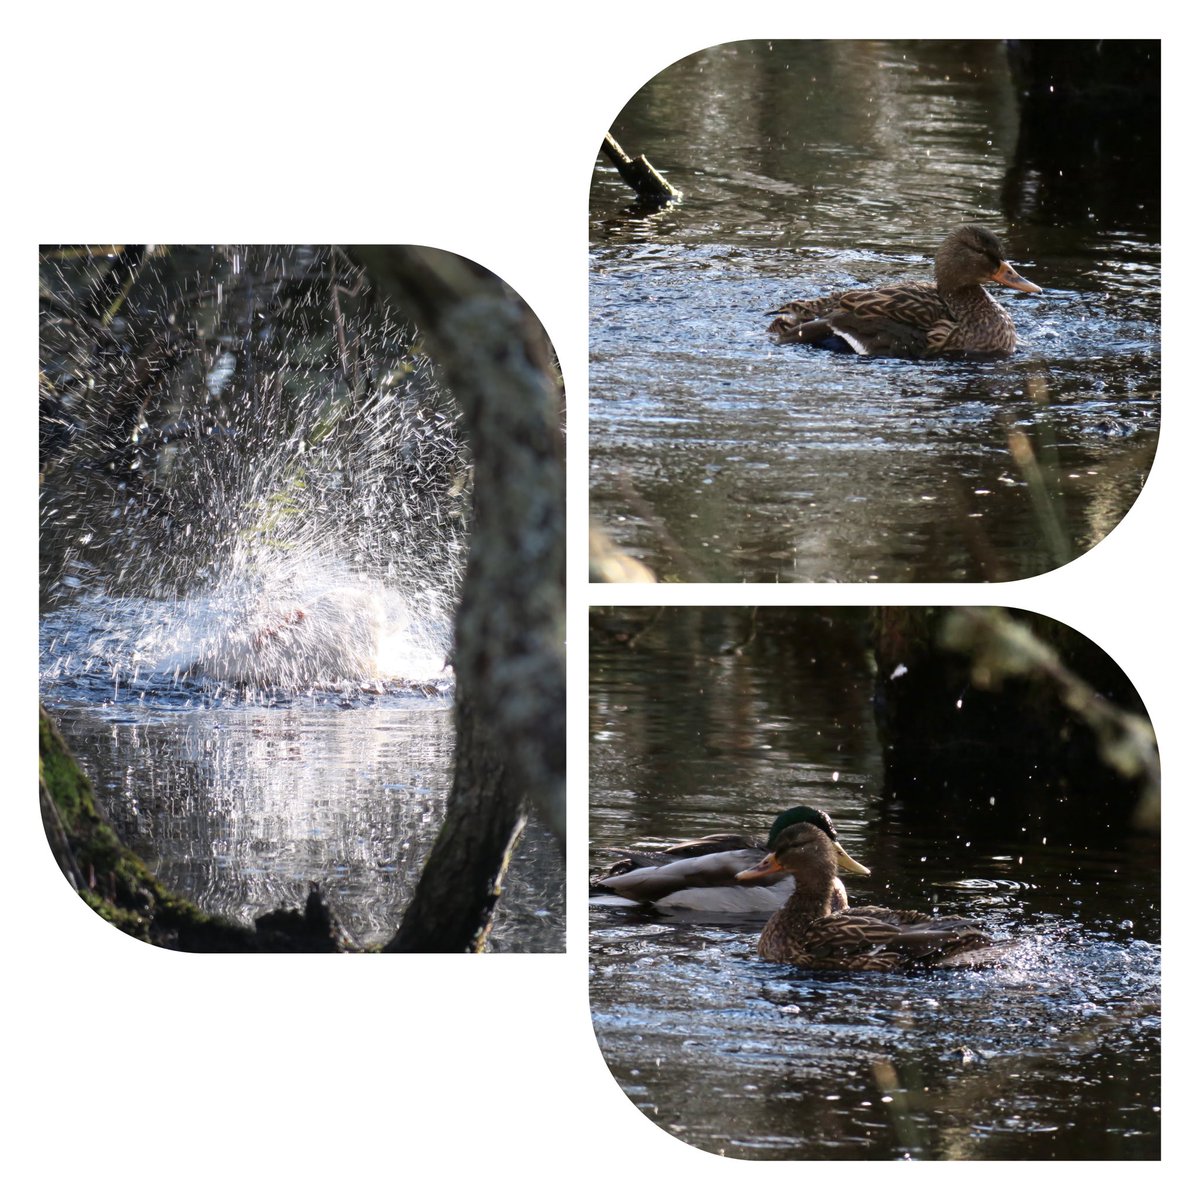 🎼Splash splash I was taking a bath.....

Well how was I to know there was a party going on🎼

They didn't know they had an audience😅
#mallards #ShellBay #BirdsSeenIn2022